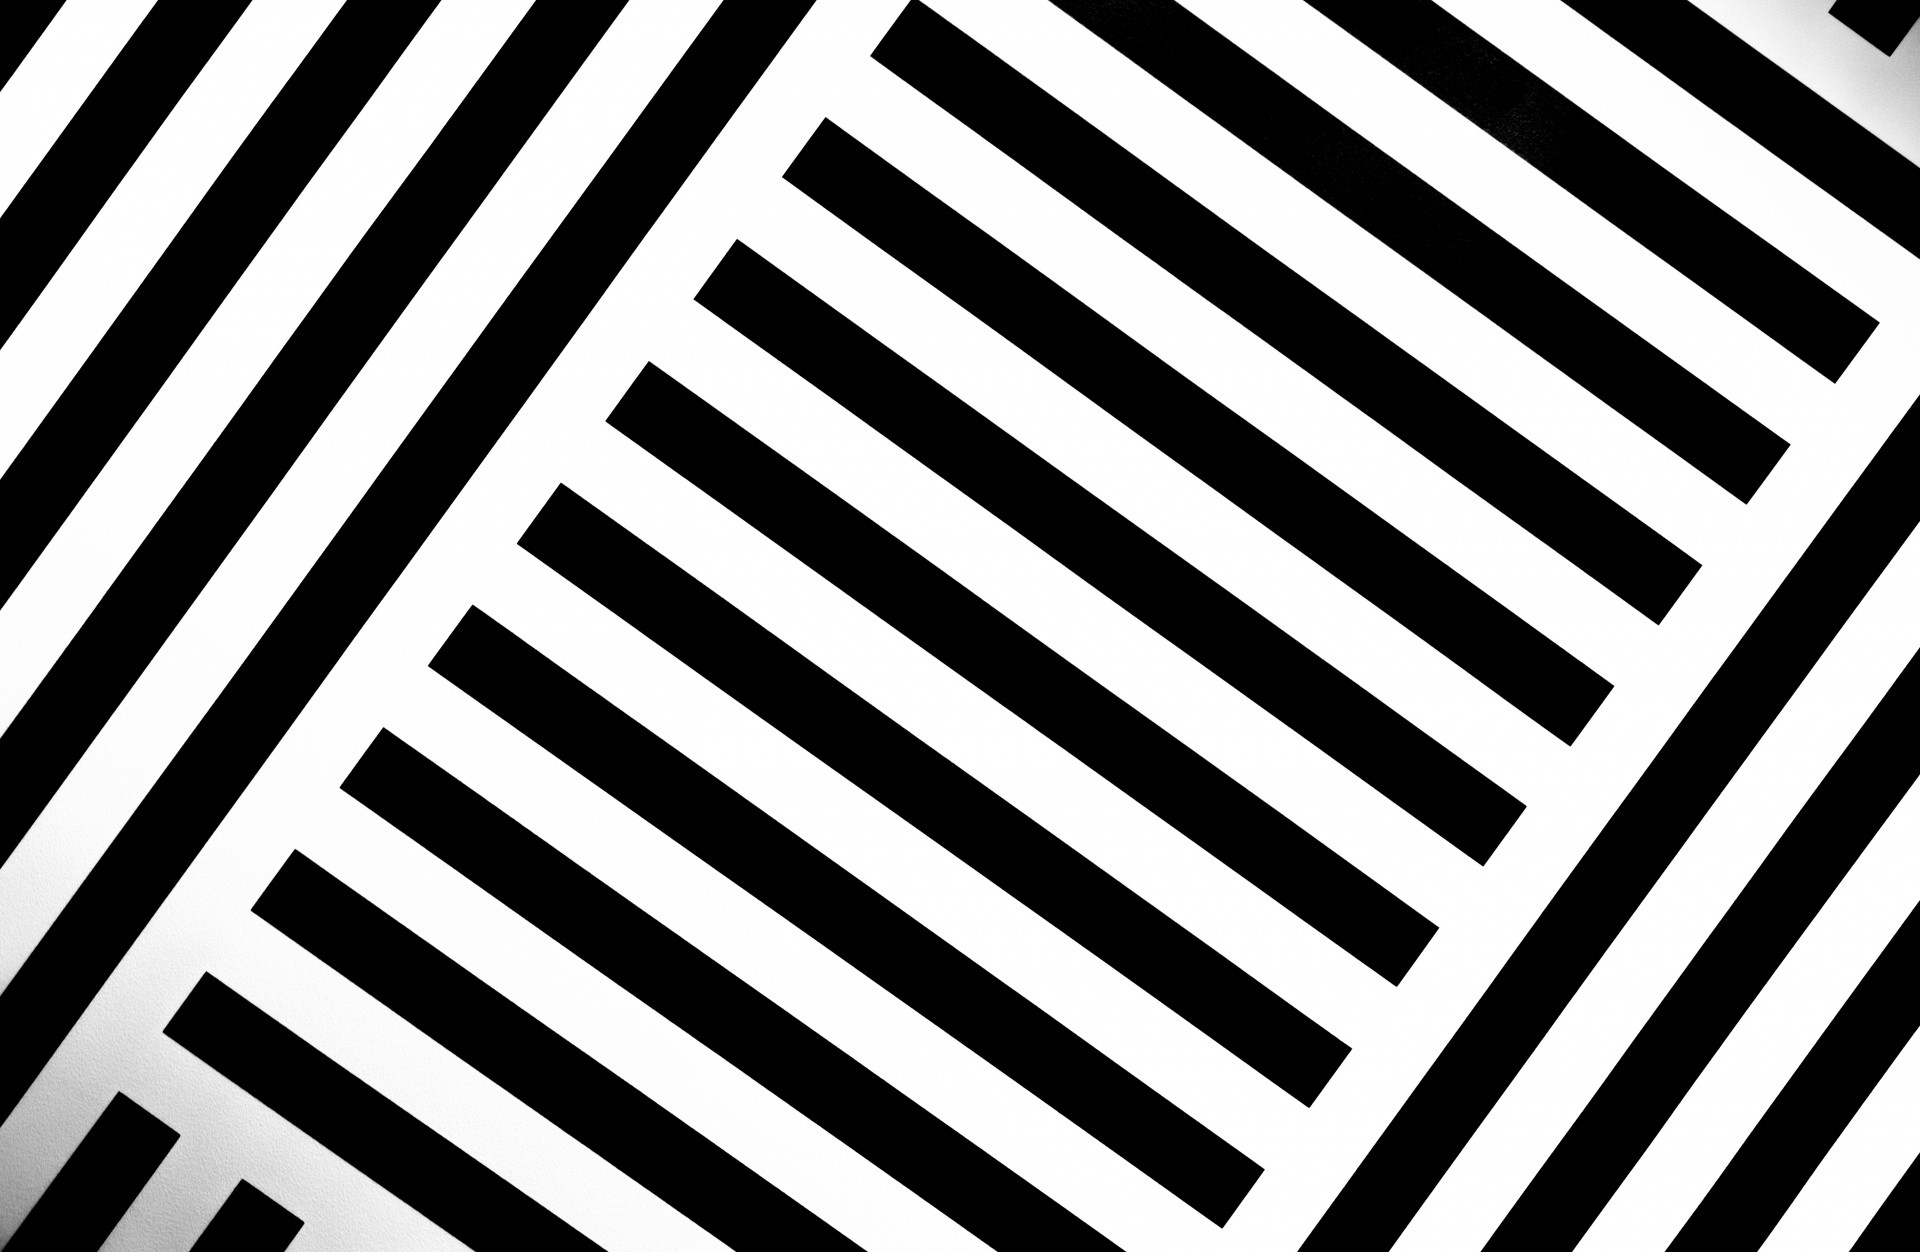  Black  and White  Striped  background    Download free 